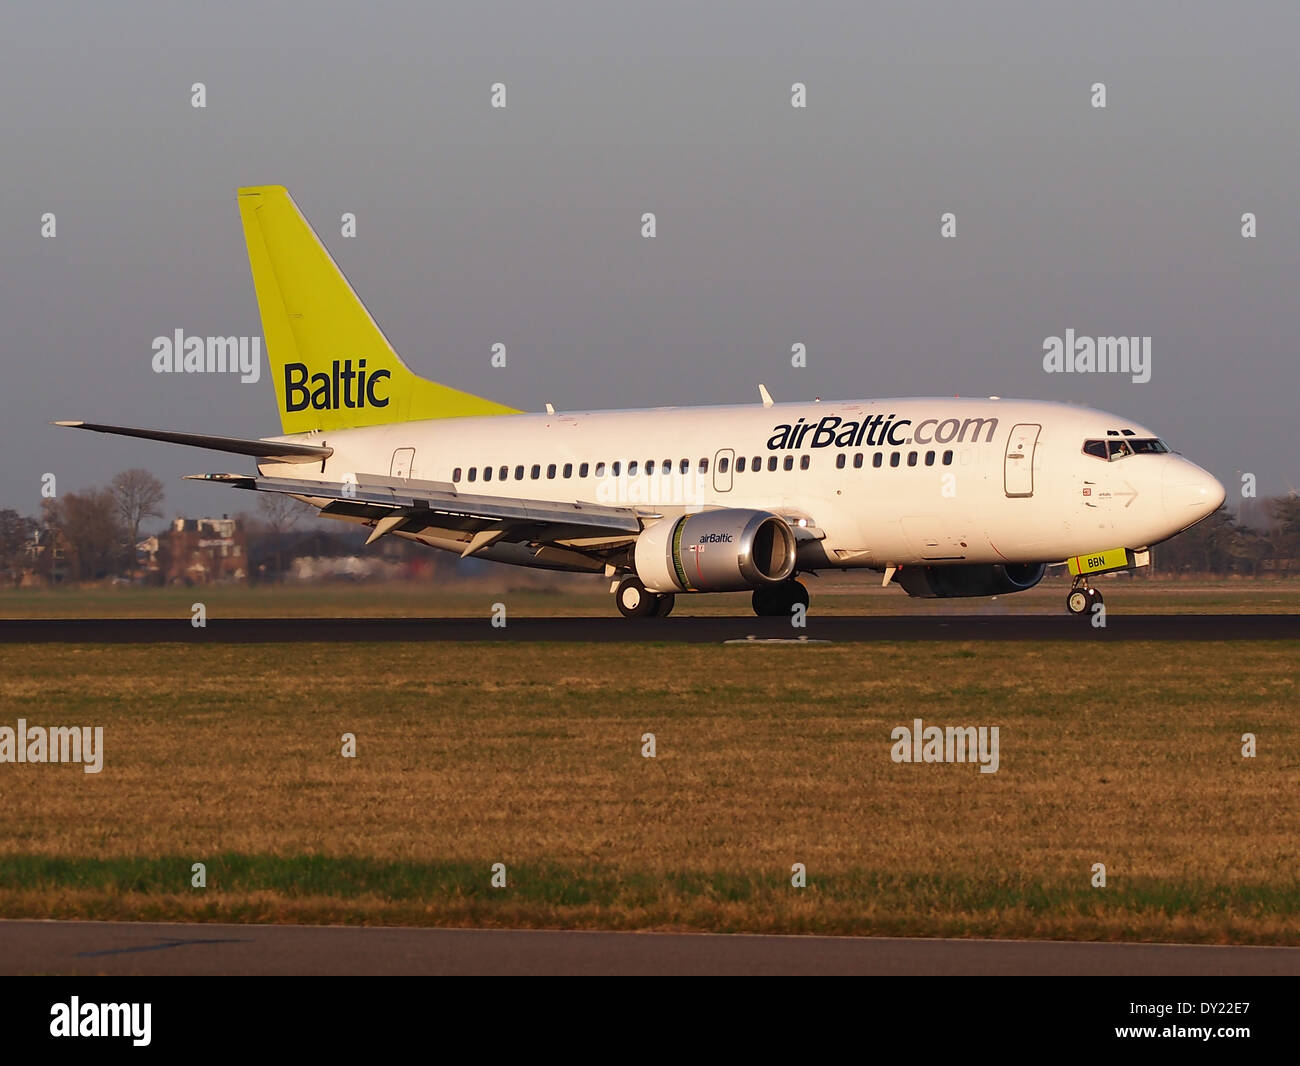 YL-BBN Air Baltic Boeing 737-522 - cn 26683, in atterraggio a AMS (Amsterdam Schiphol), pic3 Foto Stock